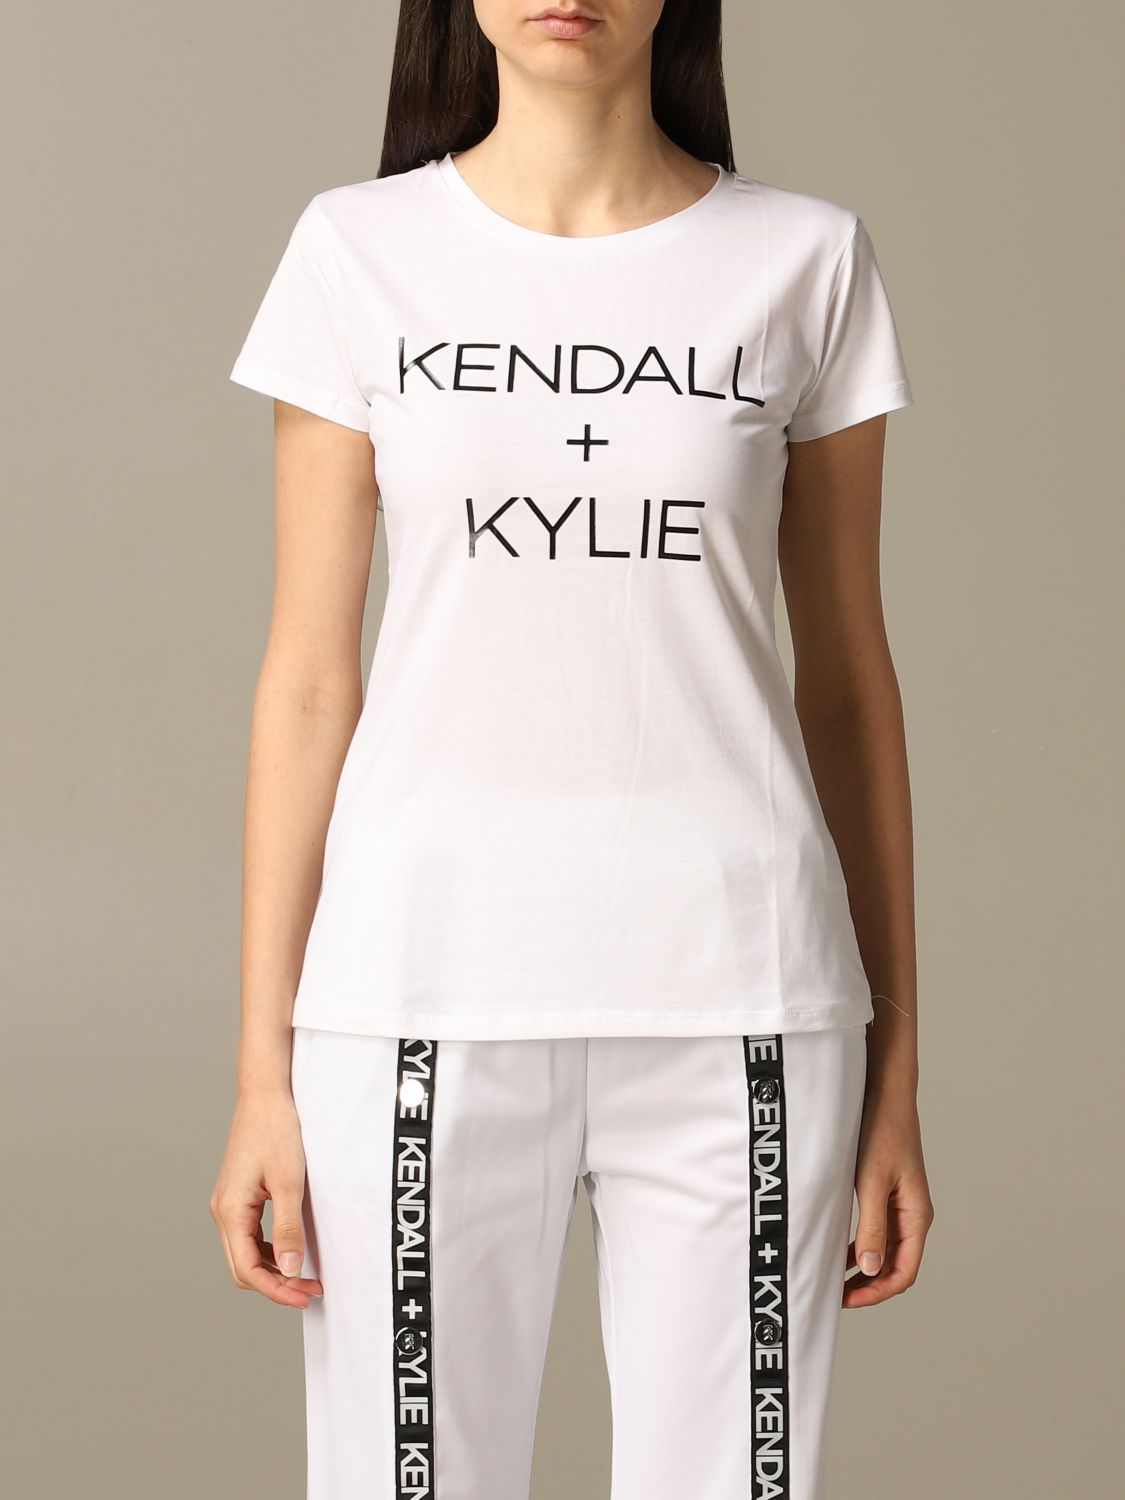 Circus envelope bypass Kendall + Kylie Outlet: t-shirt for woman - White | Kendall + Kylie t-shirt  B21049284 online on GIGLIO.COM